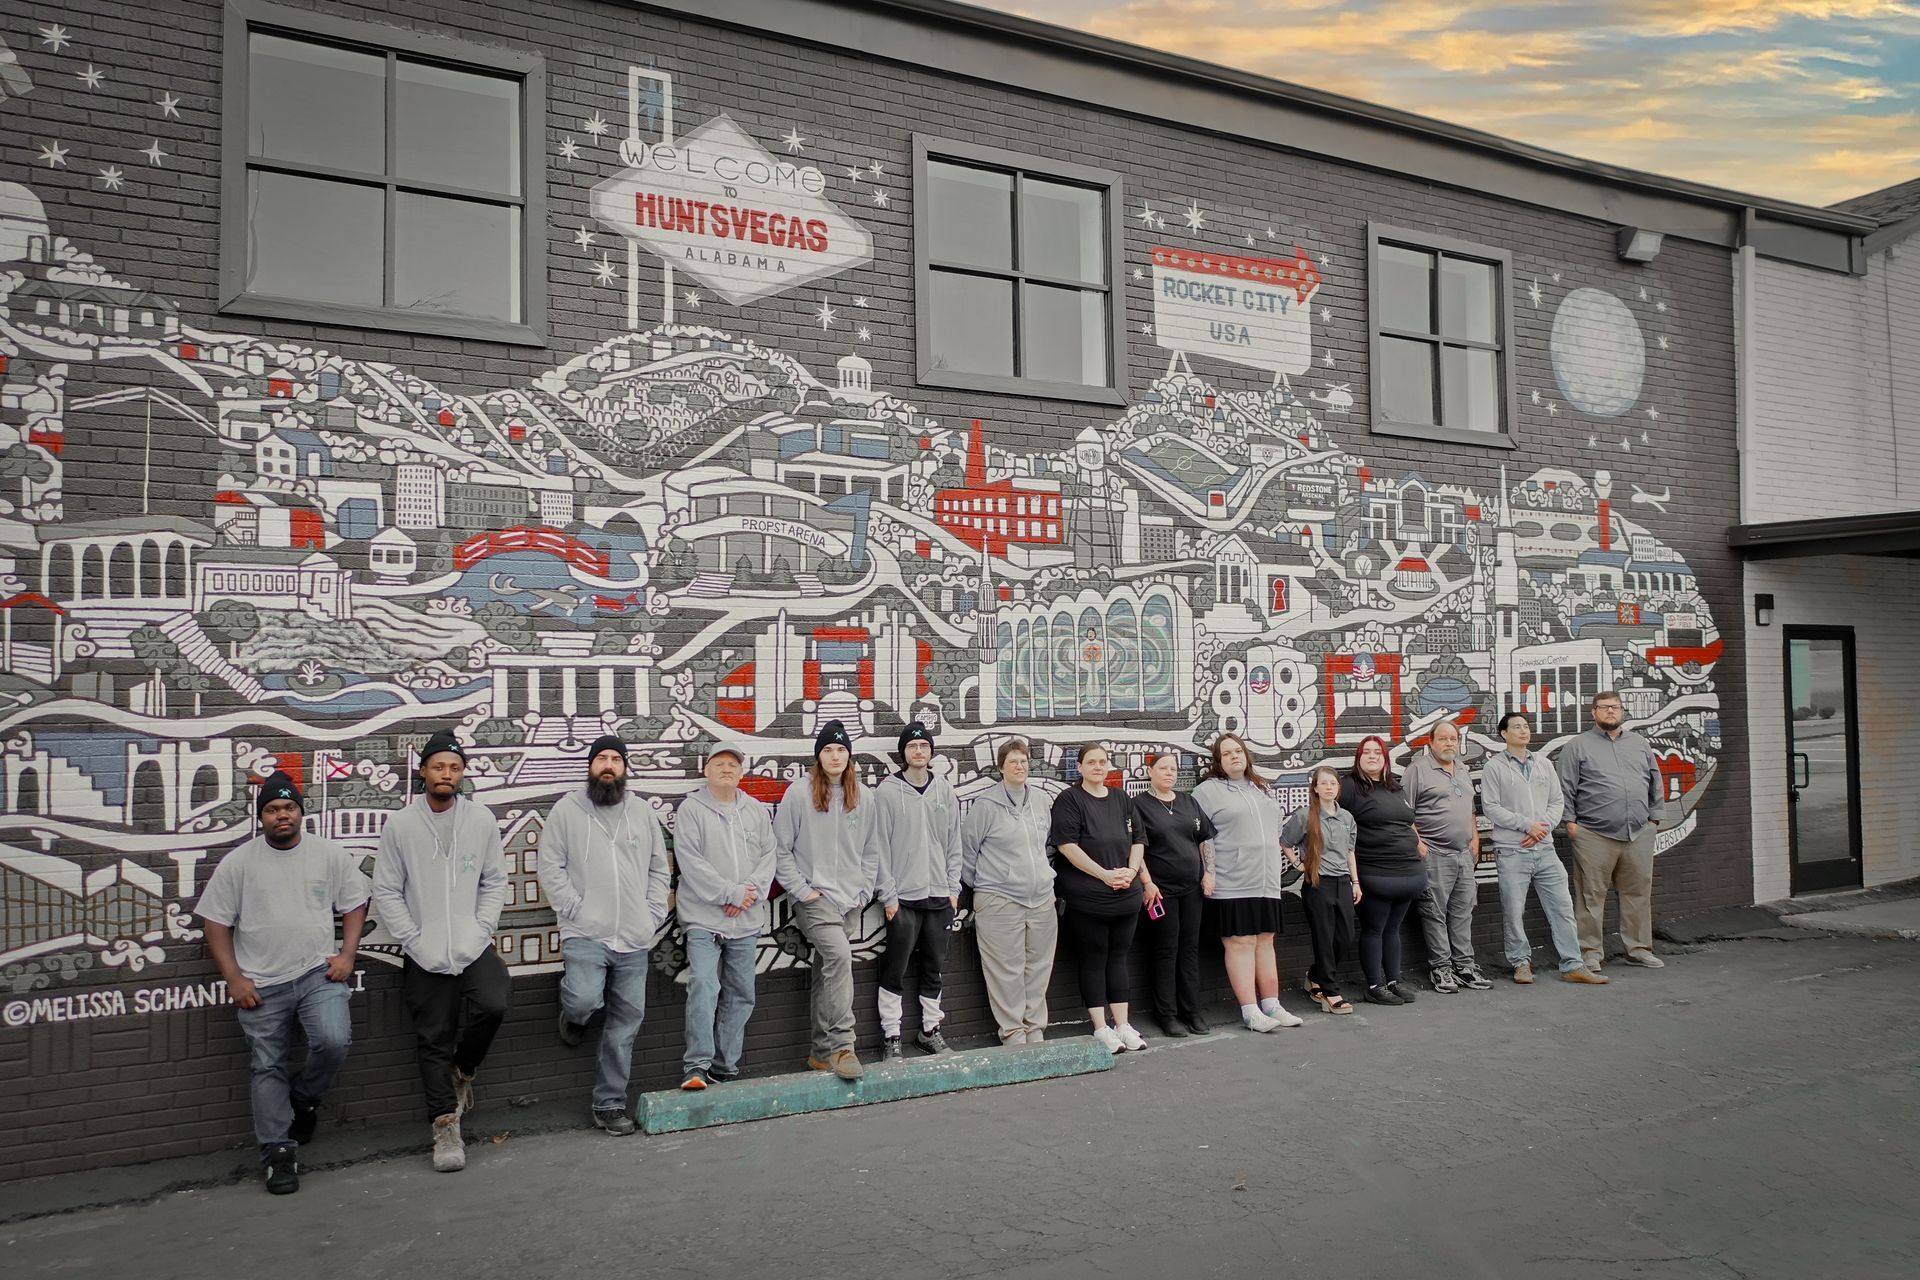 A group of people are standing in front of a large mural on the side of a building.